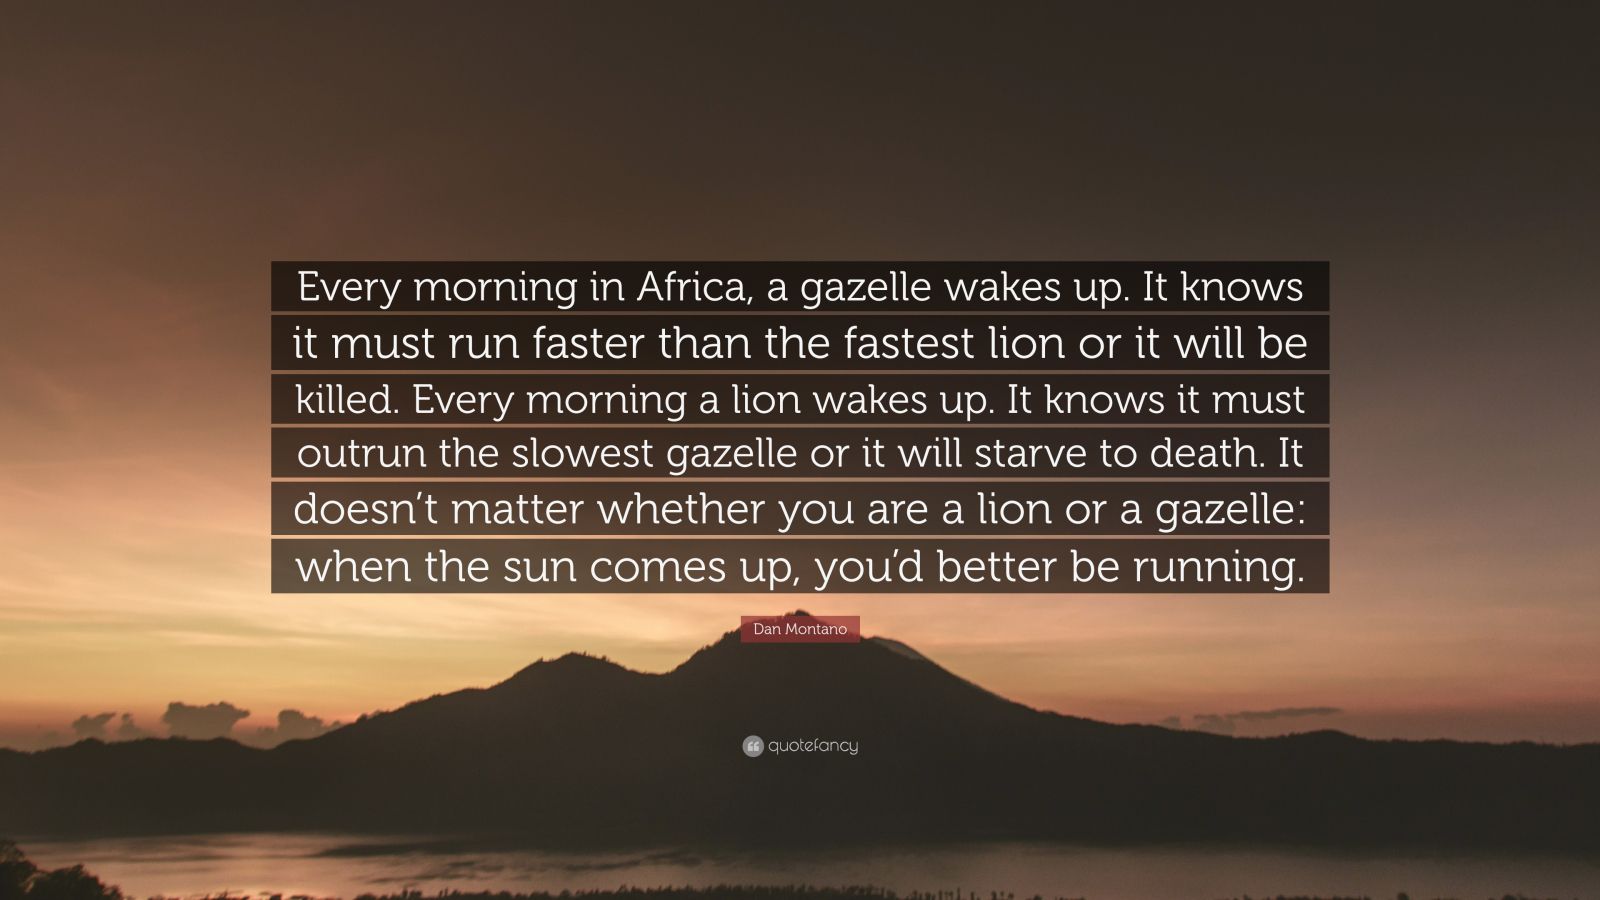 Dan Montano Quote: "Every morning in Africa, a gazelle wakes up. It knows it must run faster ...